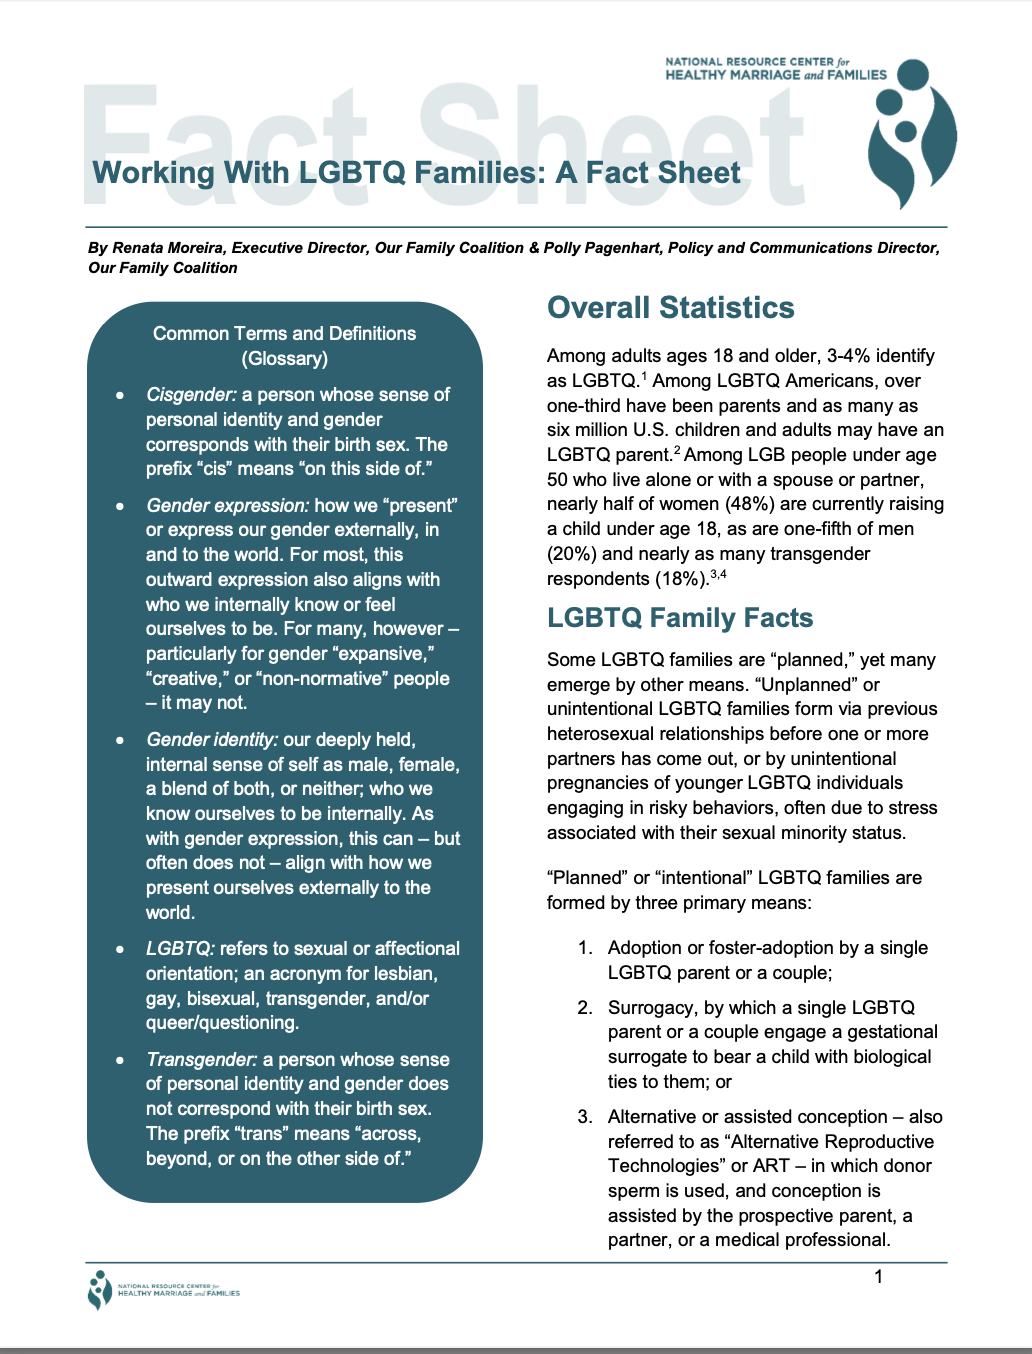 FactSheet-working with lgbtq families